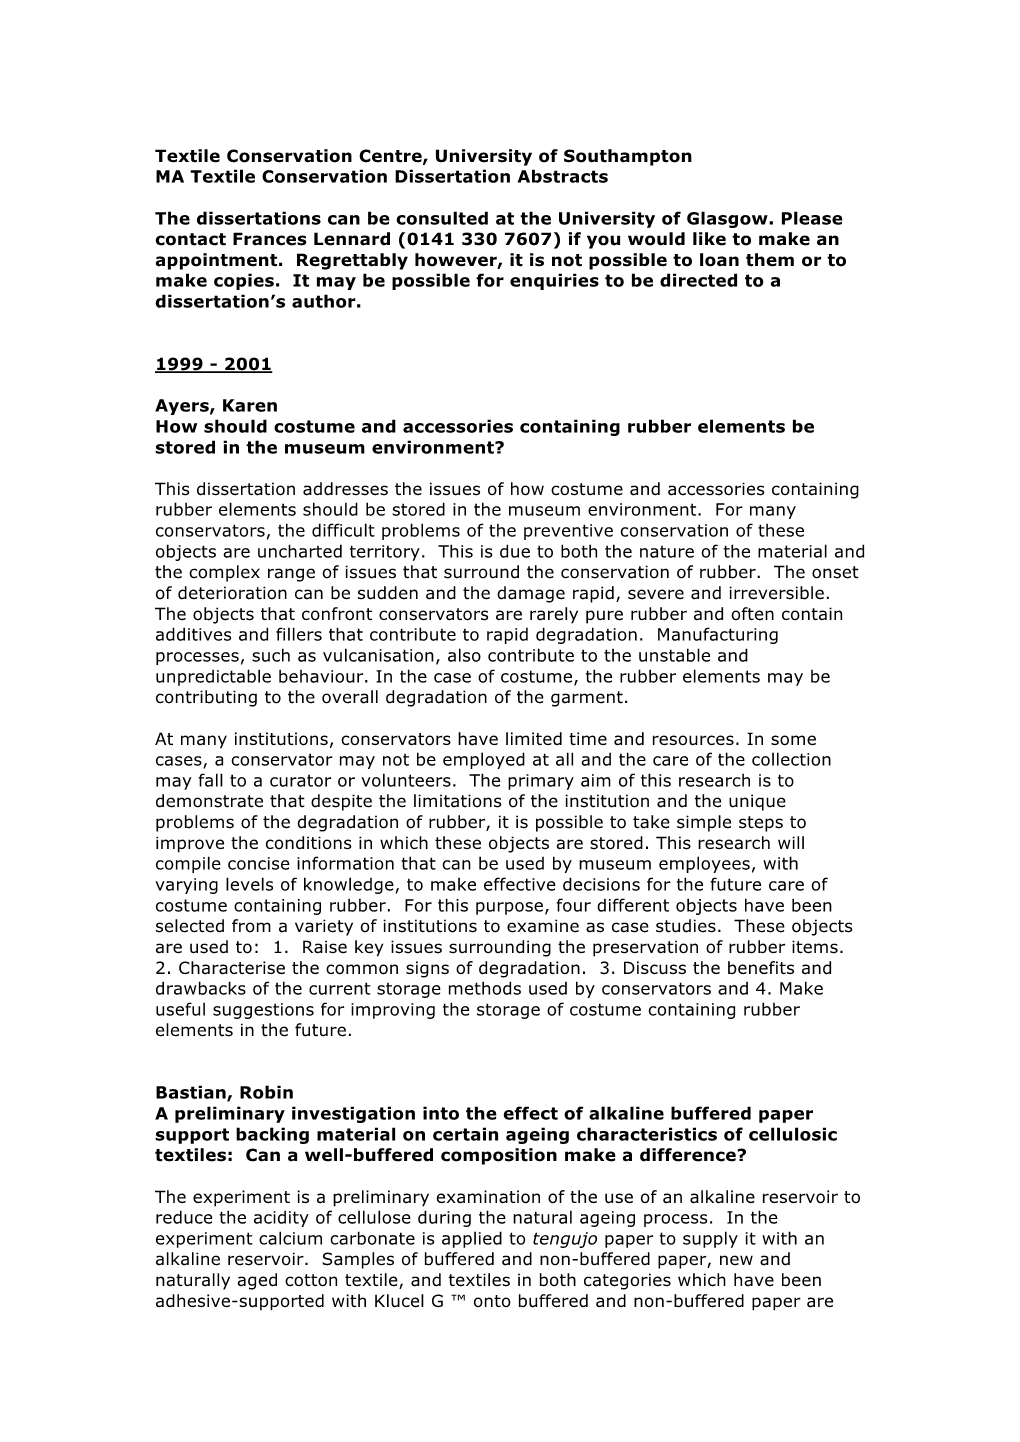 TC Dissertation Abstracts to End 2010